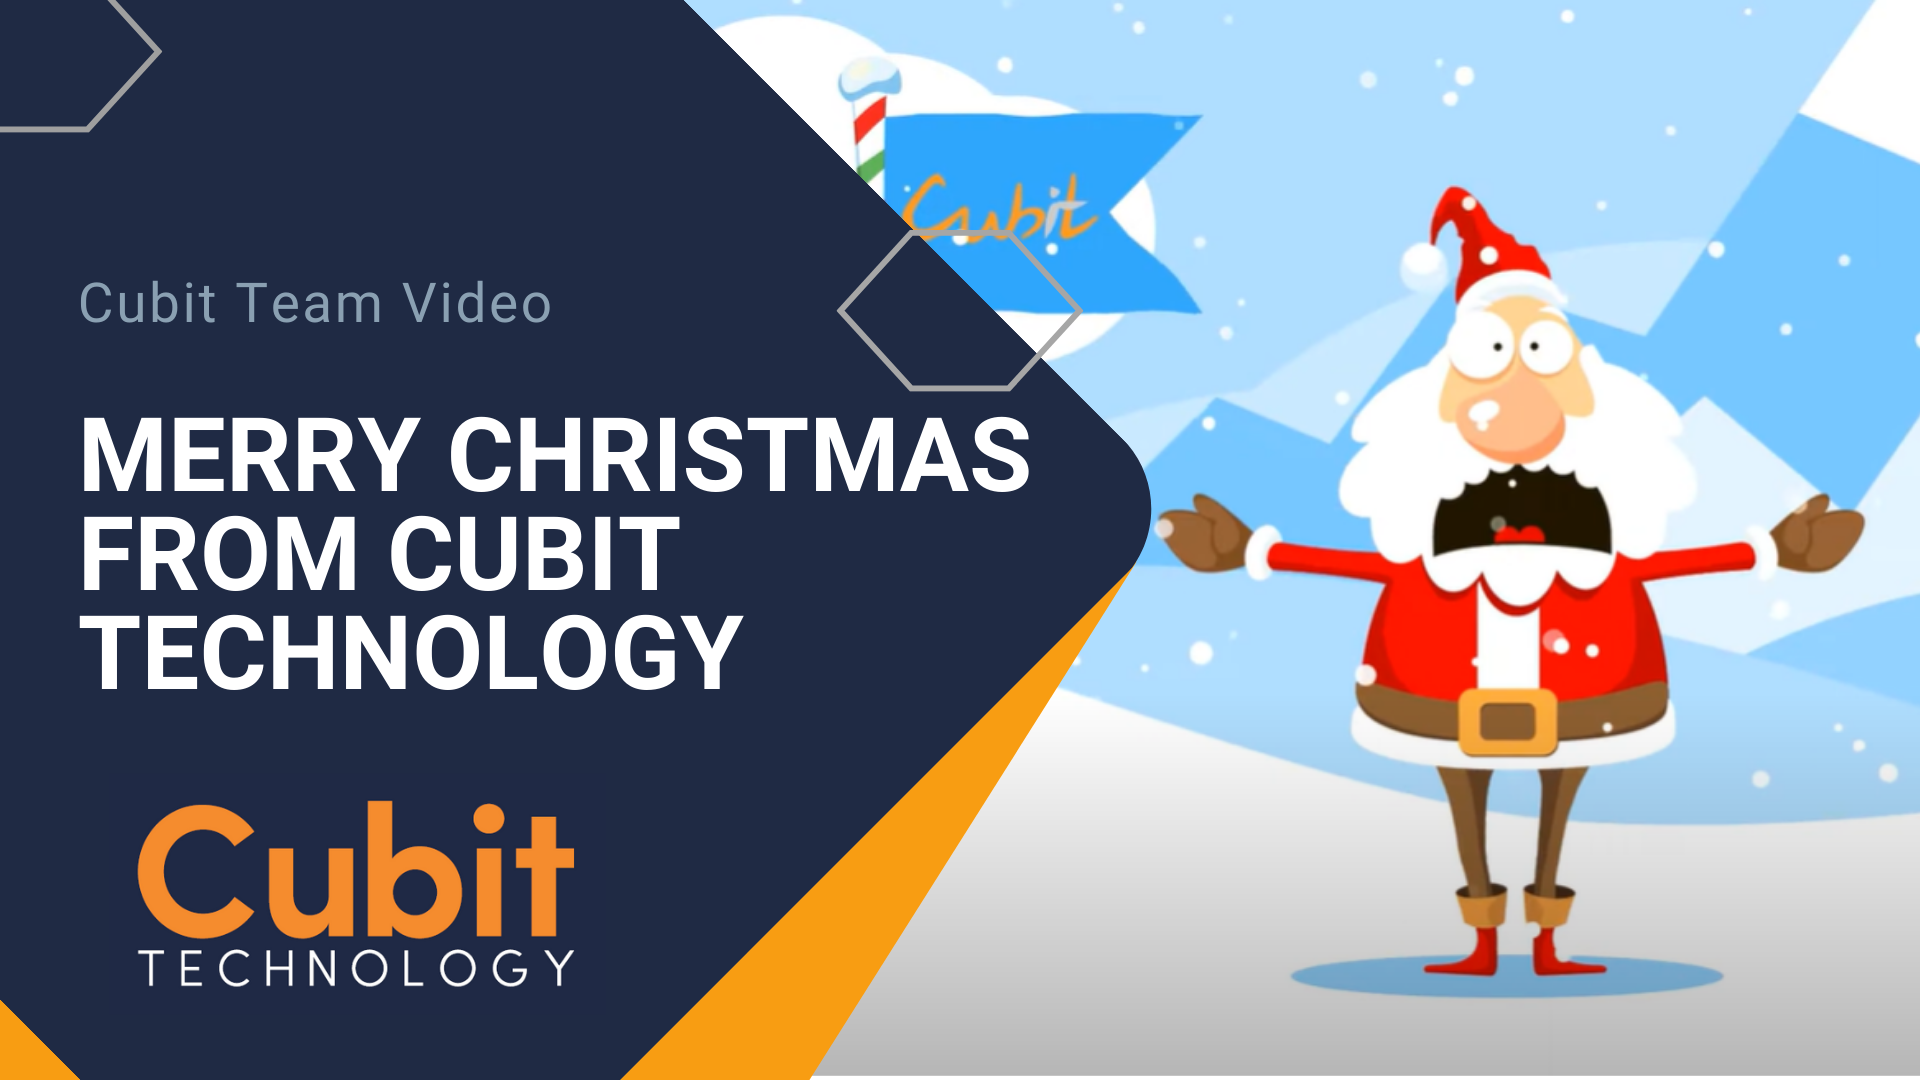 Merry Christmas from Cubit Technology